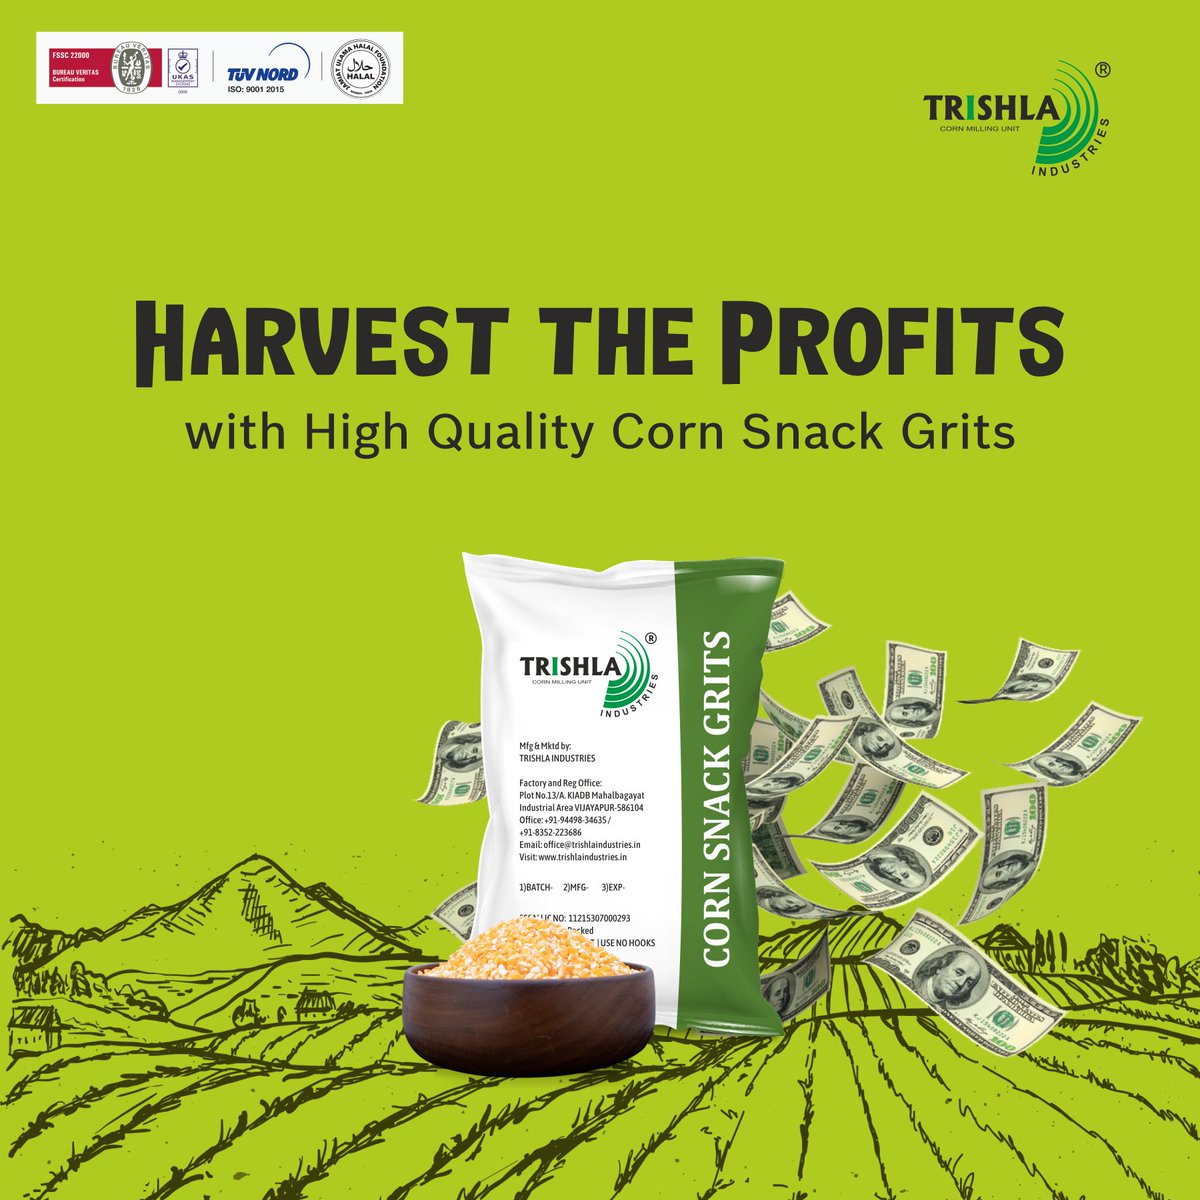 Looking for the perfect snack for your snacking industry? Look no further! We offer high quality, raw corn snack grits for export.

#CornSnack #snackindustry #rawcorn #cornexporter #indianagriculture #CornGrits #CornSnackingGrits #Cornproducts #CornPuff #Cornsnack #Dubai